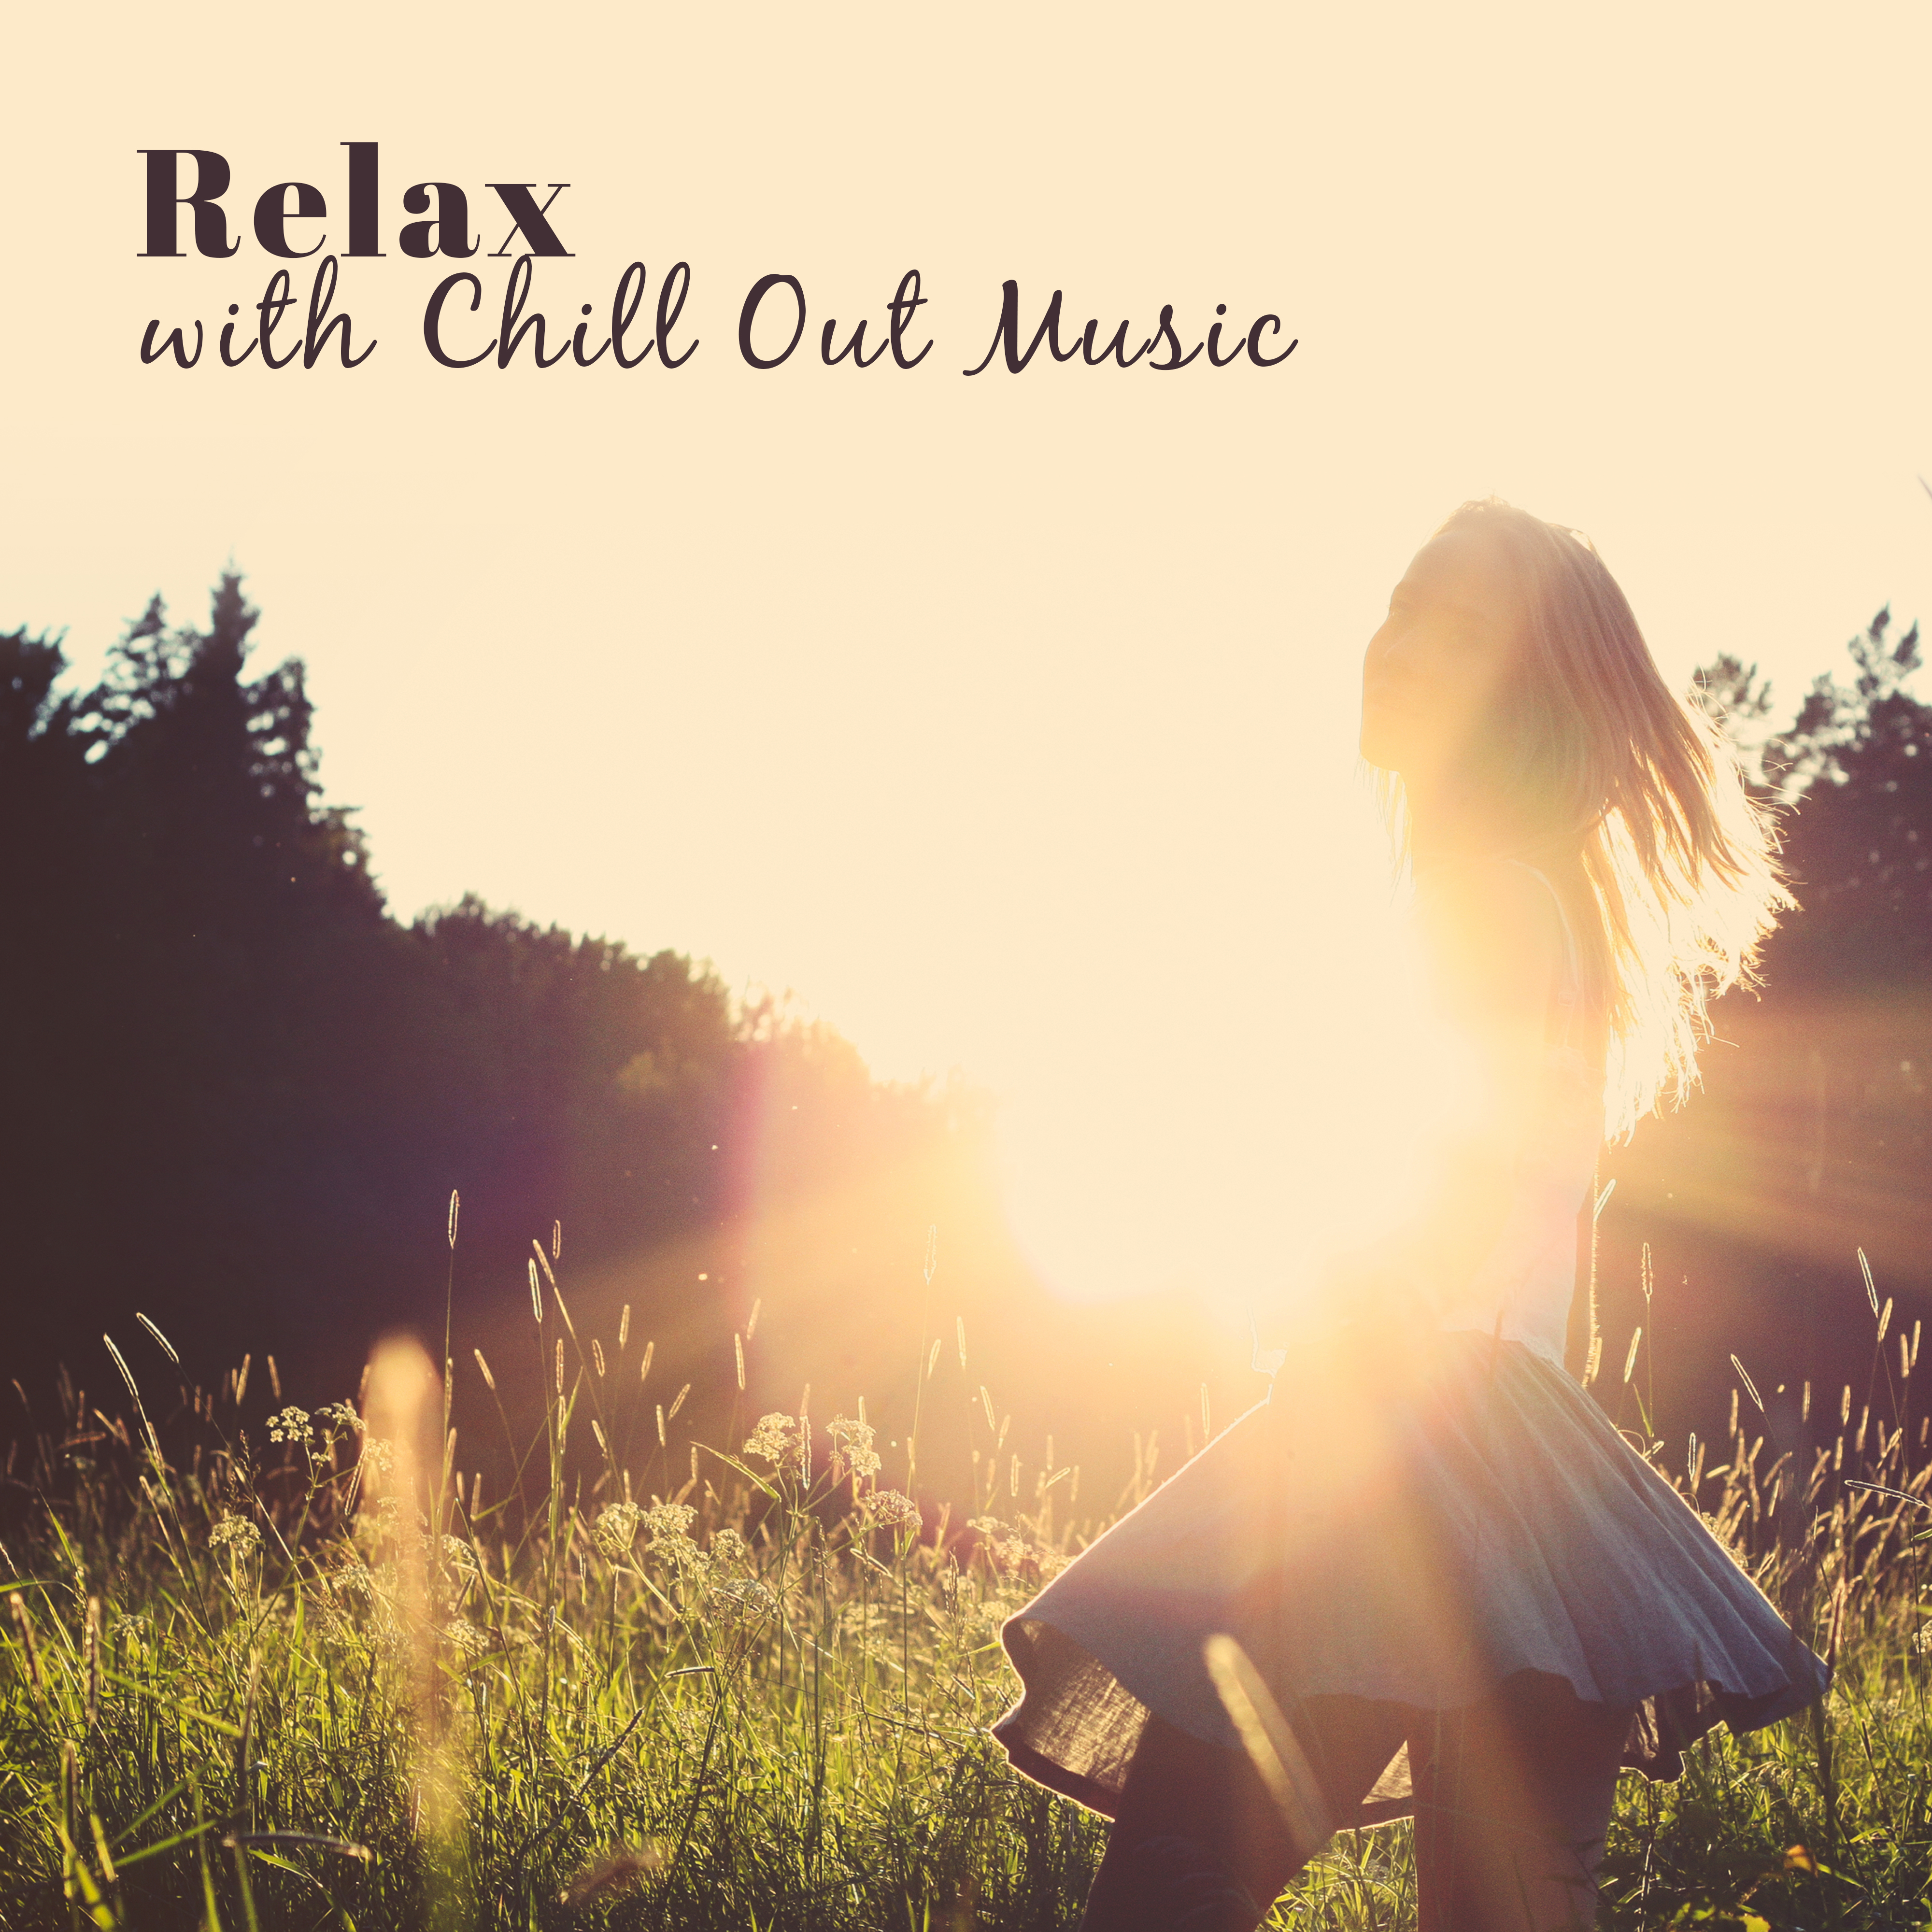 Relax with Chill Out Music  Soft Music to Calm Mind, Summer Chill Out Vibes, Sun  Sand, Beach Lounge